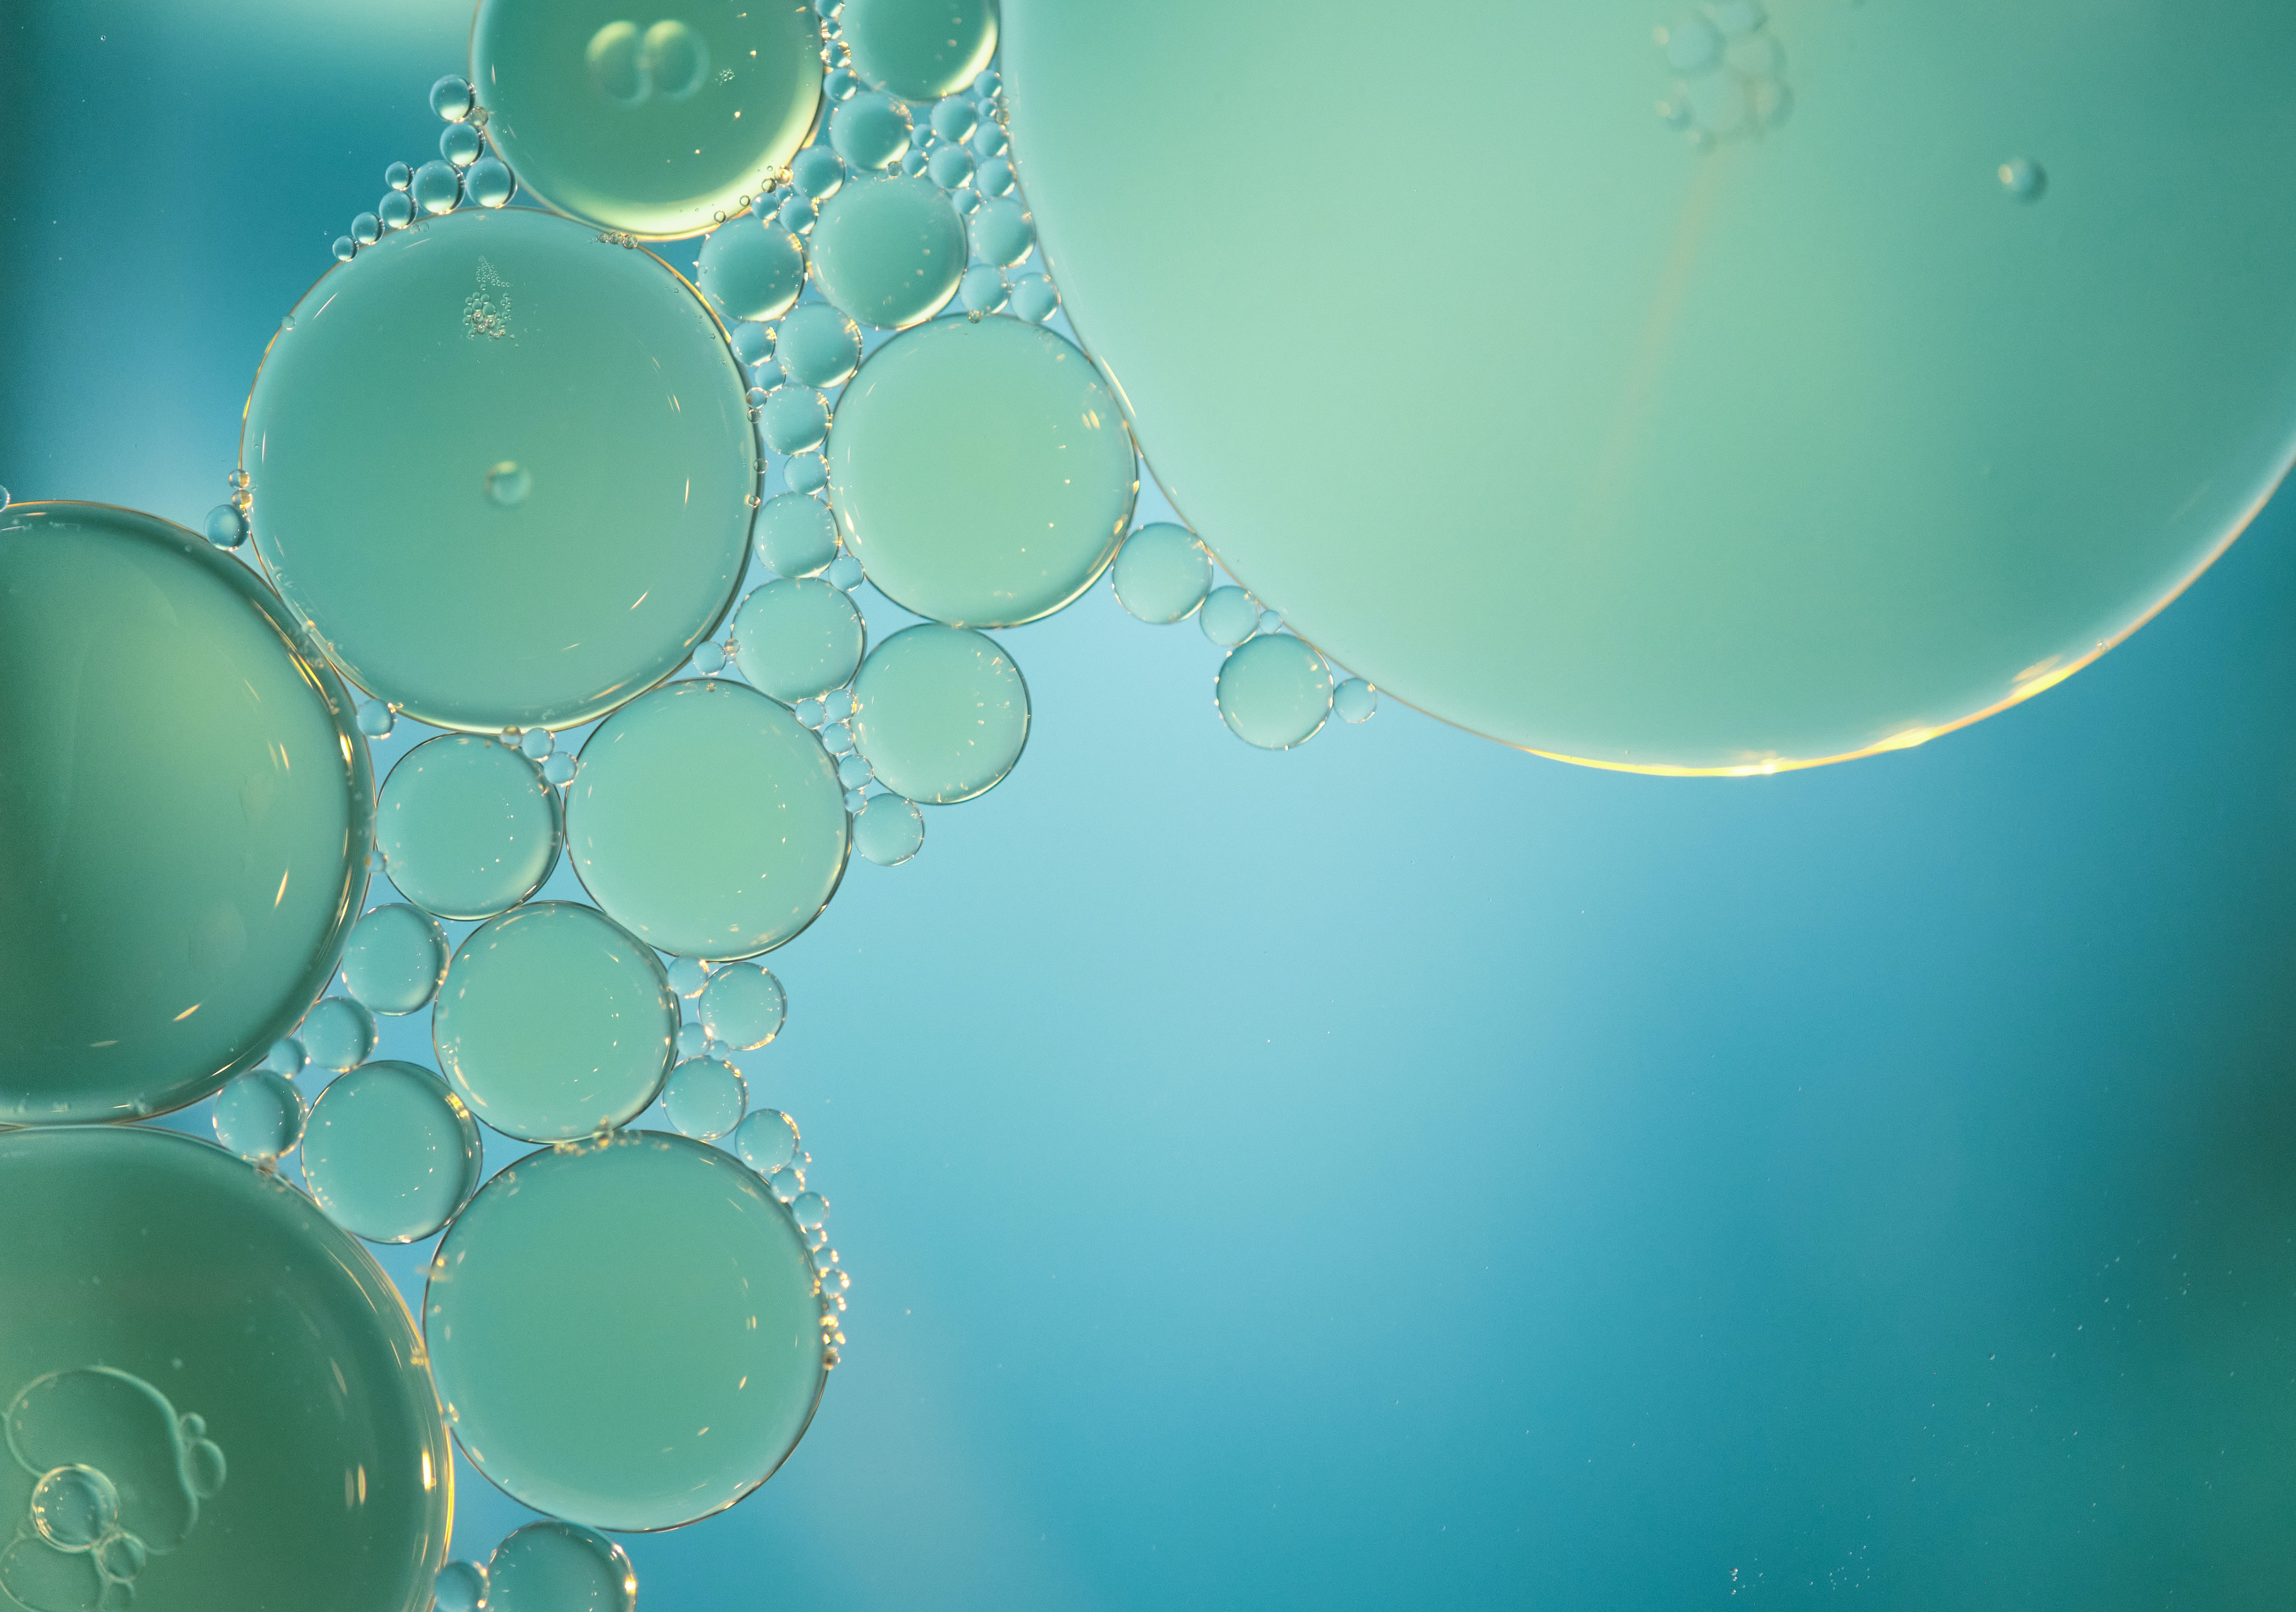 abstract, water, bubbles, blue, circles Image for desktop